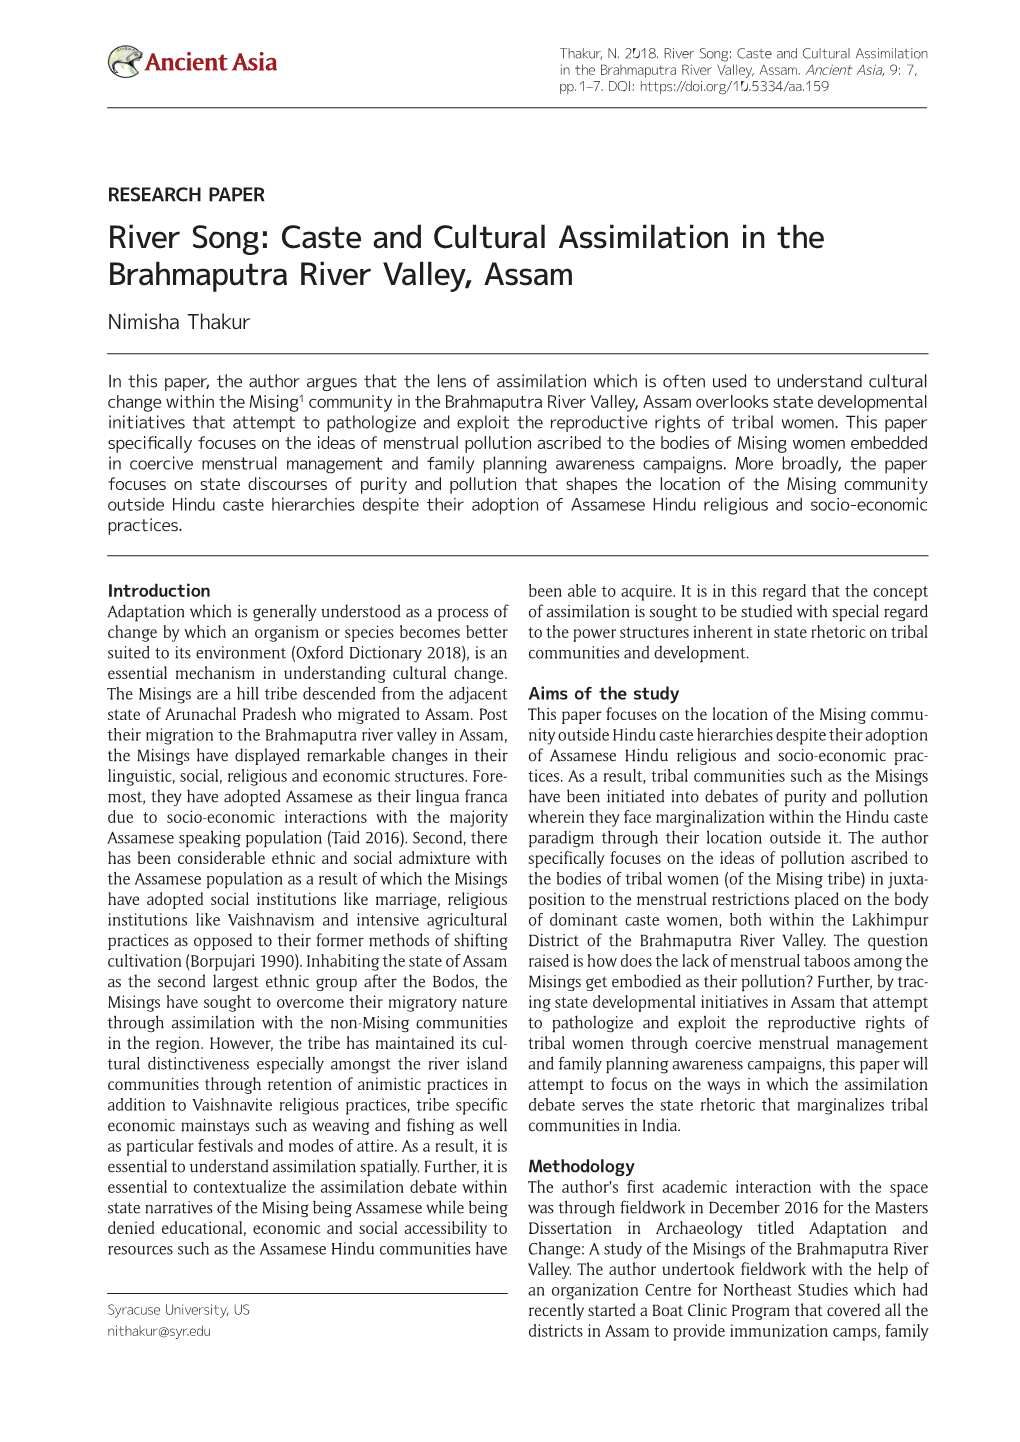 Caste and Cultural Assimilation in the Brahmaputra River Valley, Assam Nimisha Thakur